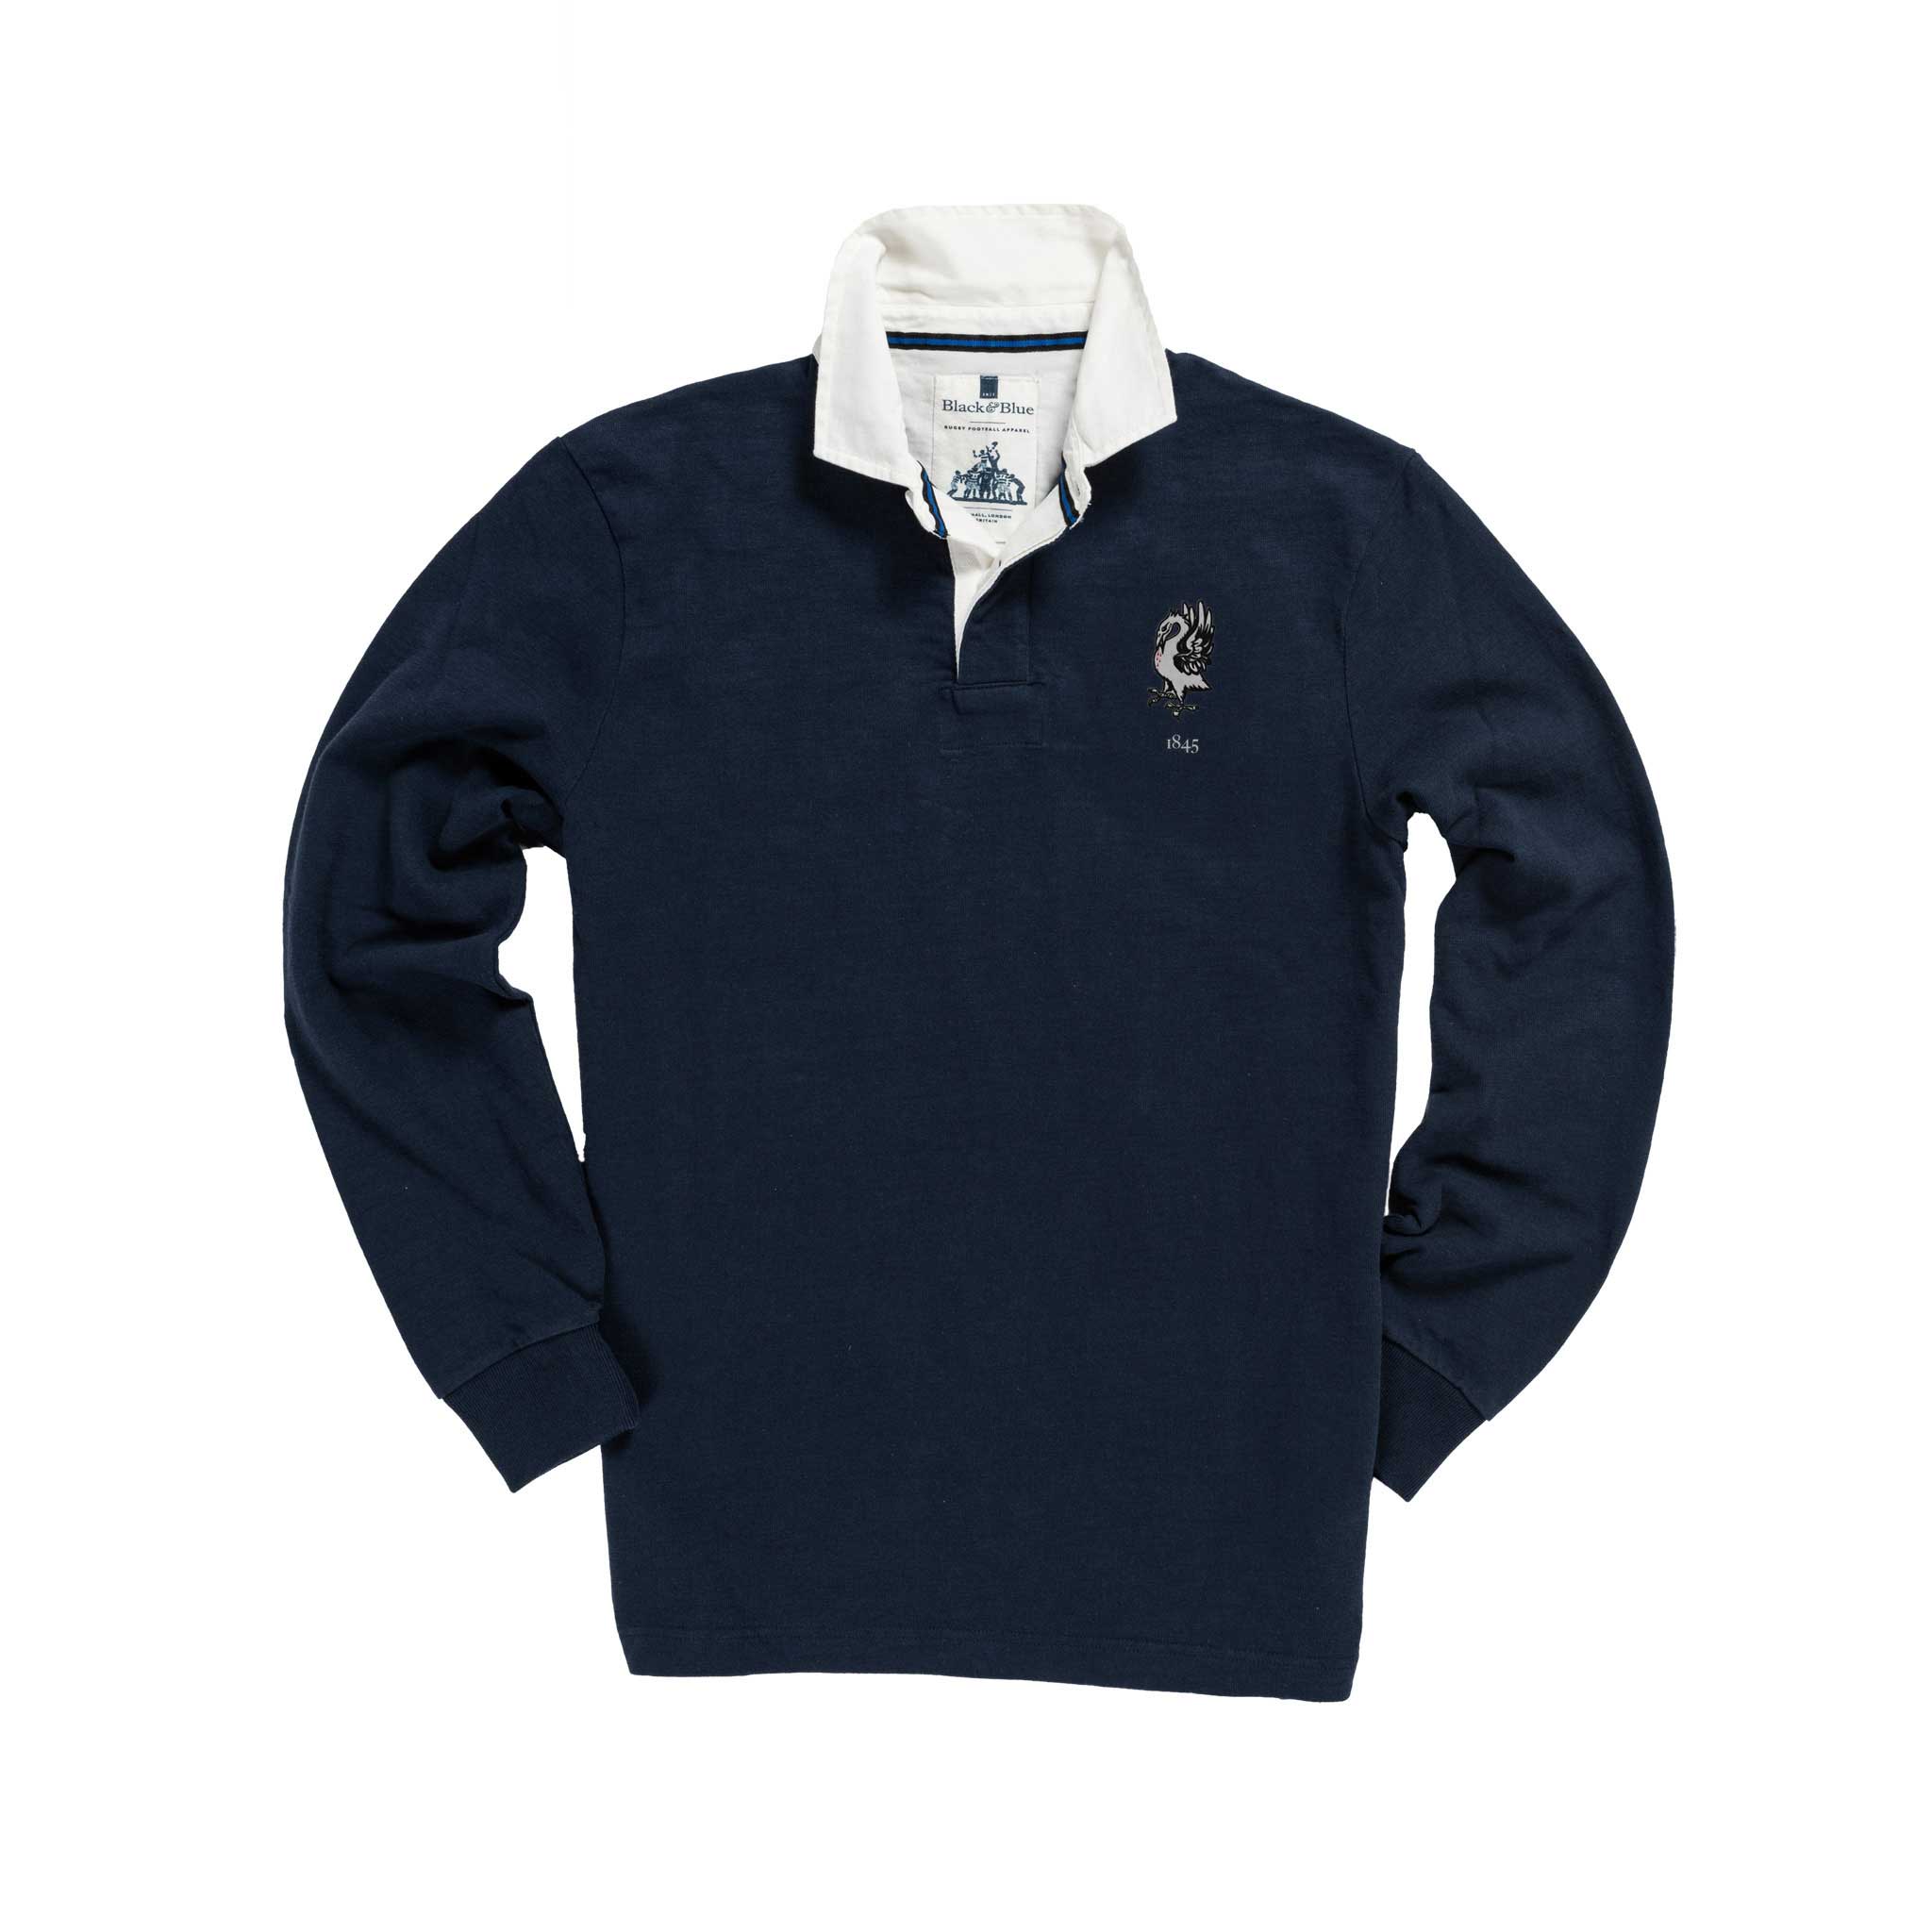 Brighton College 1845 Rugby Shirt_Front